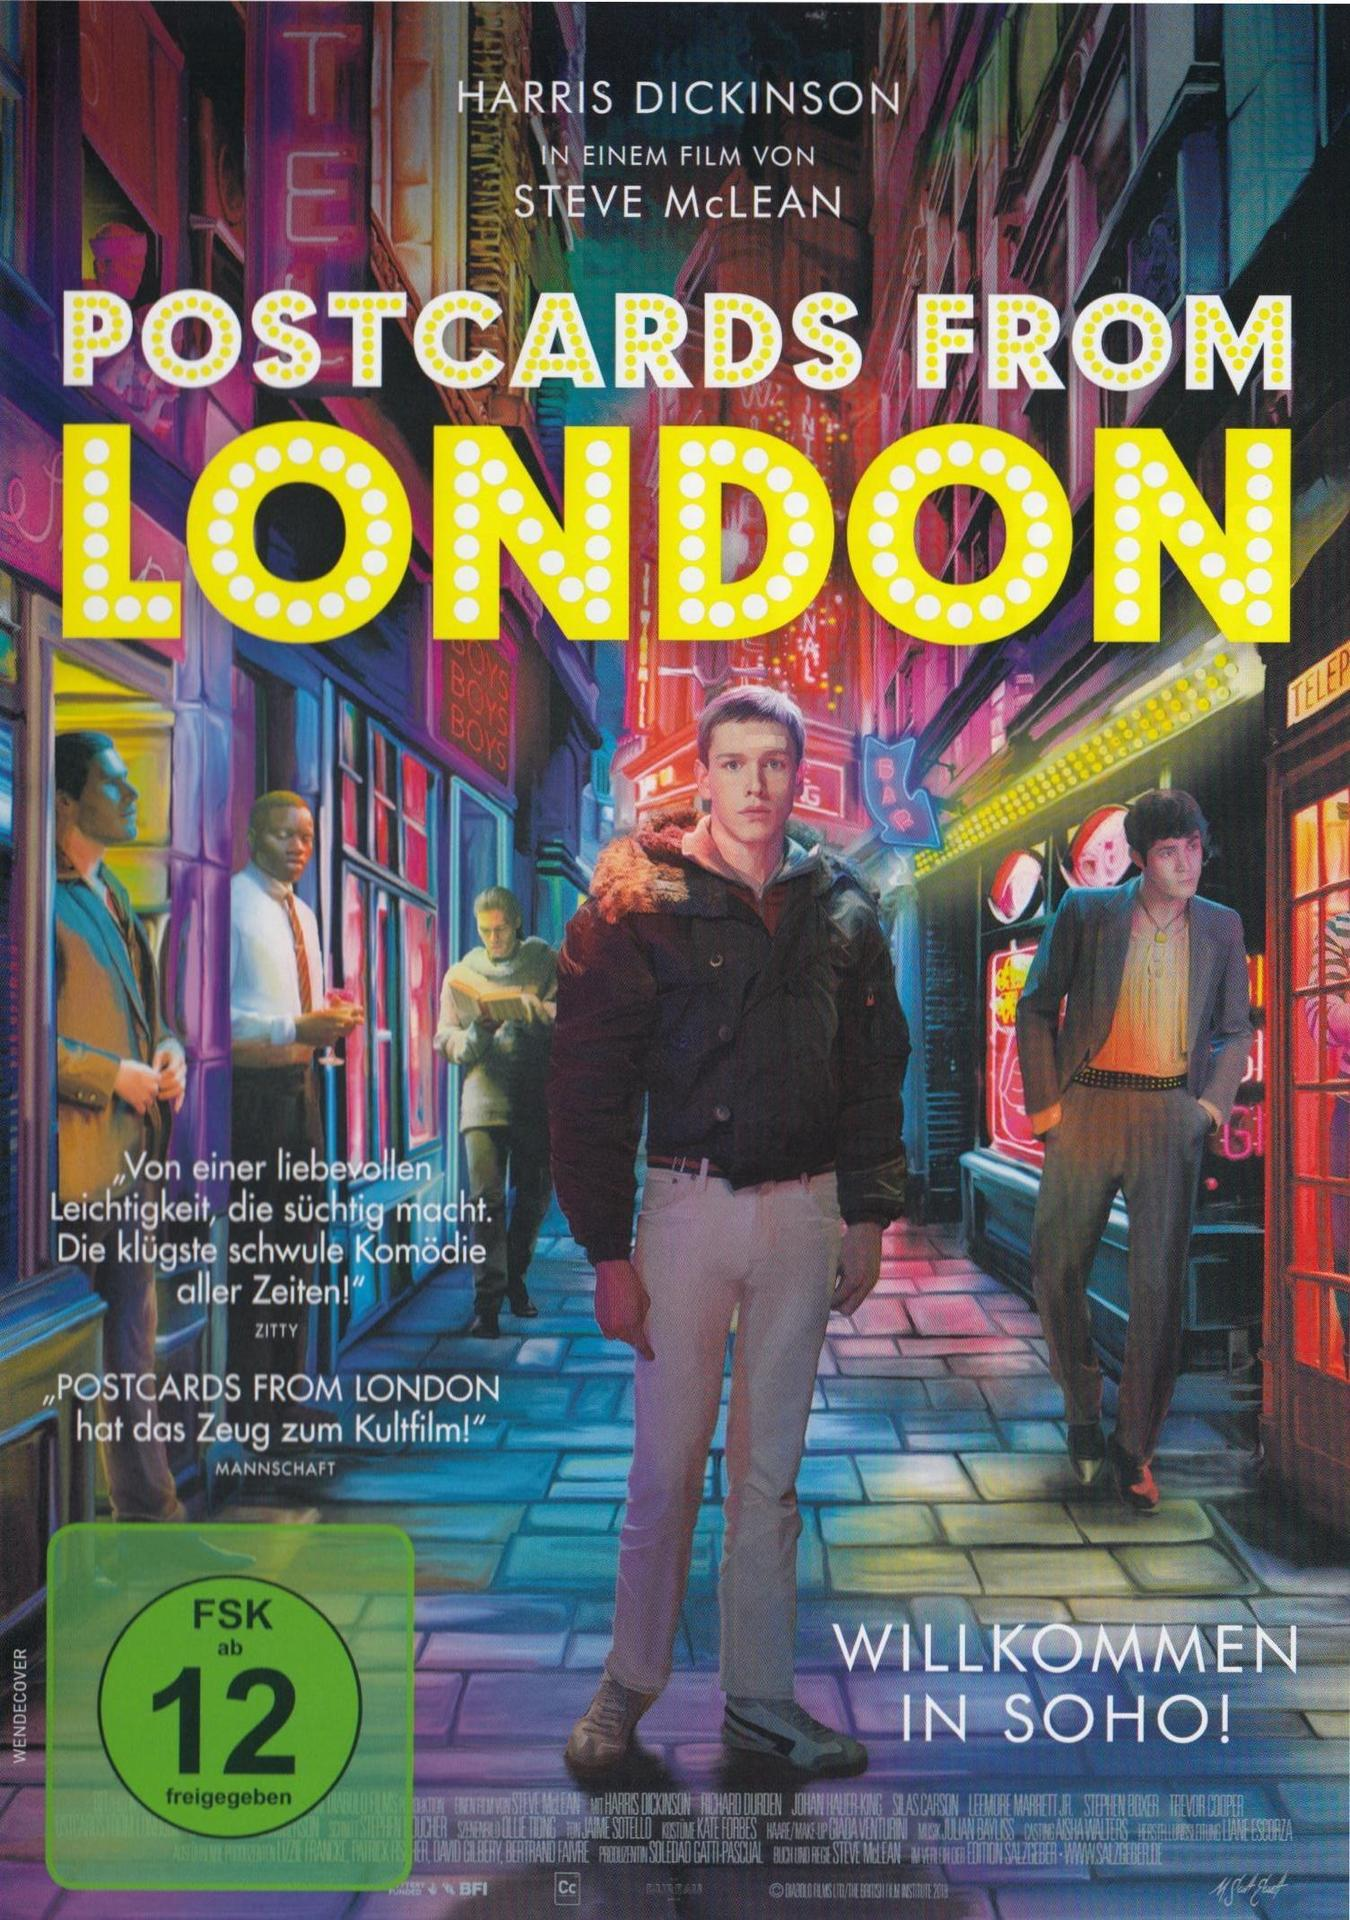 DVD from London Postcards